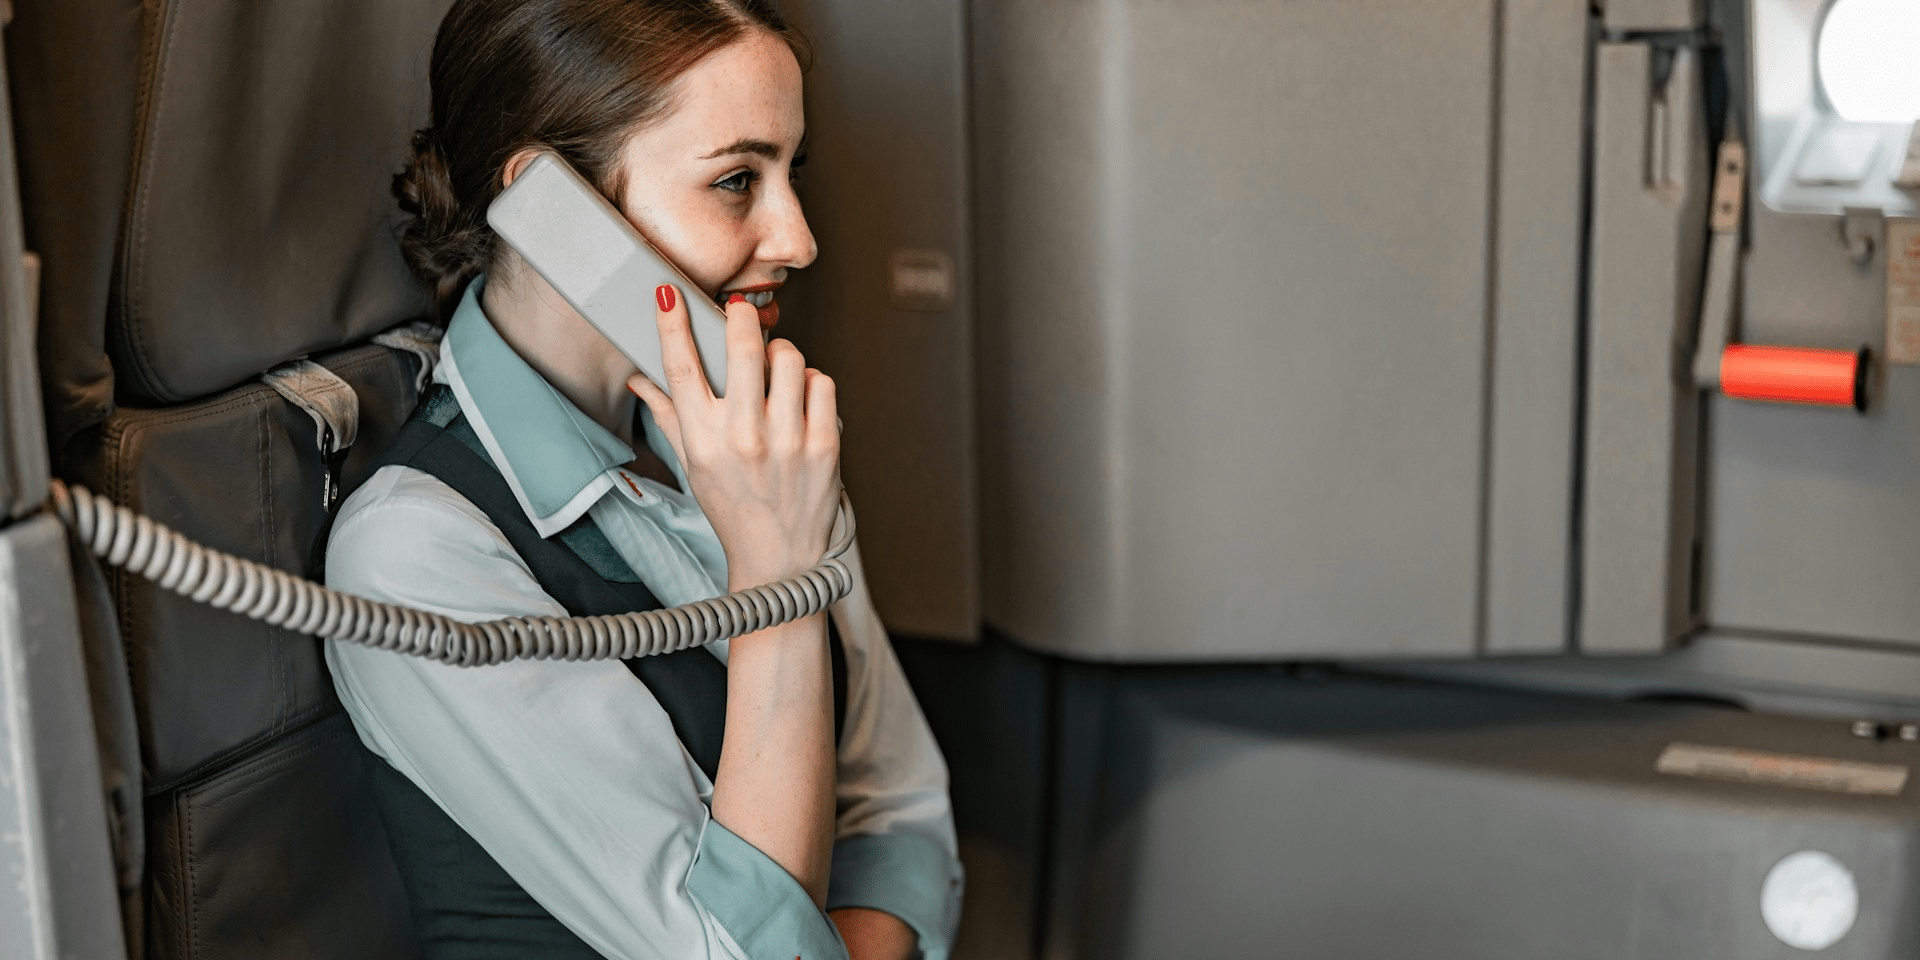 So You Want to Be a Flight Attendant